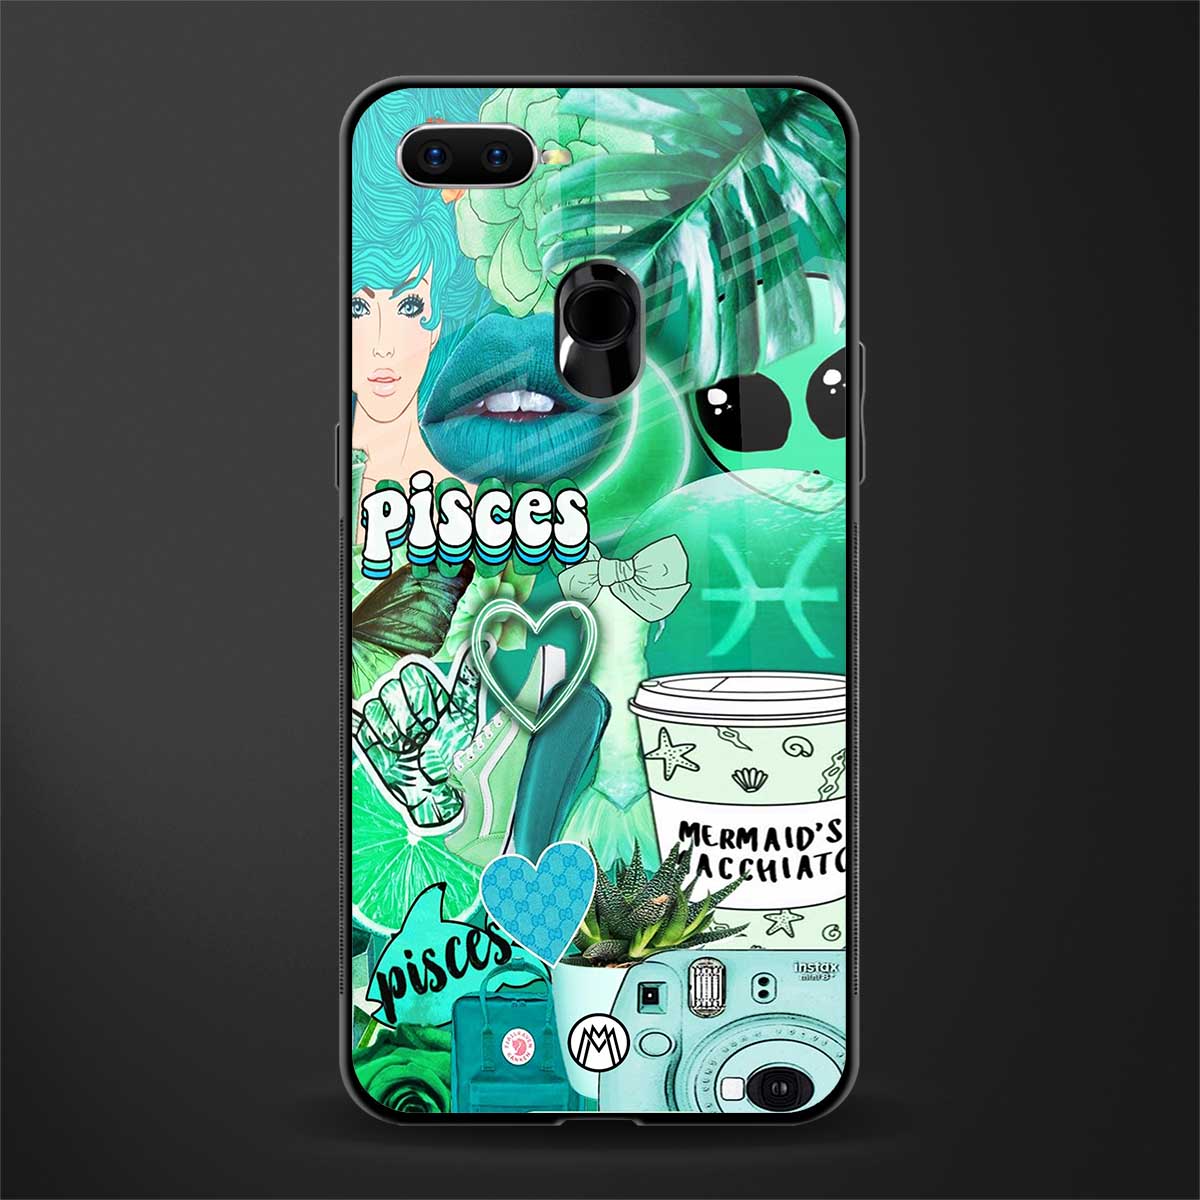 pisces aesthetic collage glass case for oppo a7 image